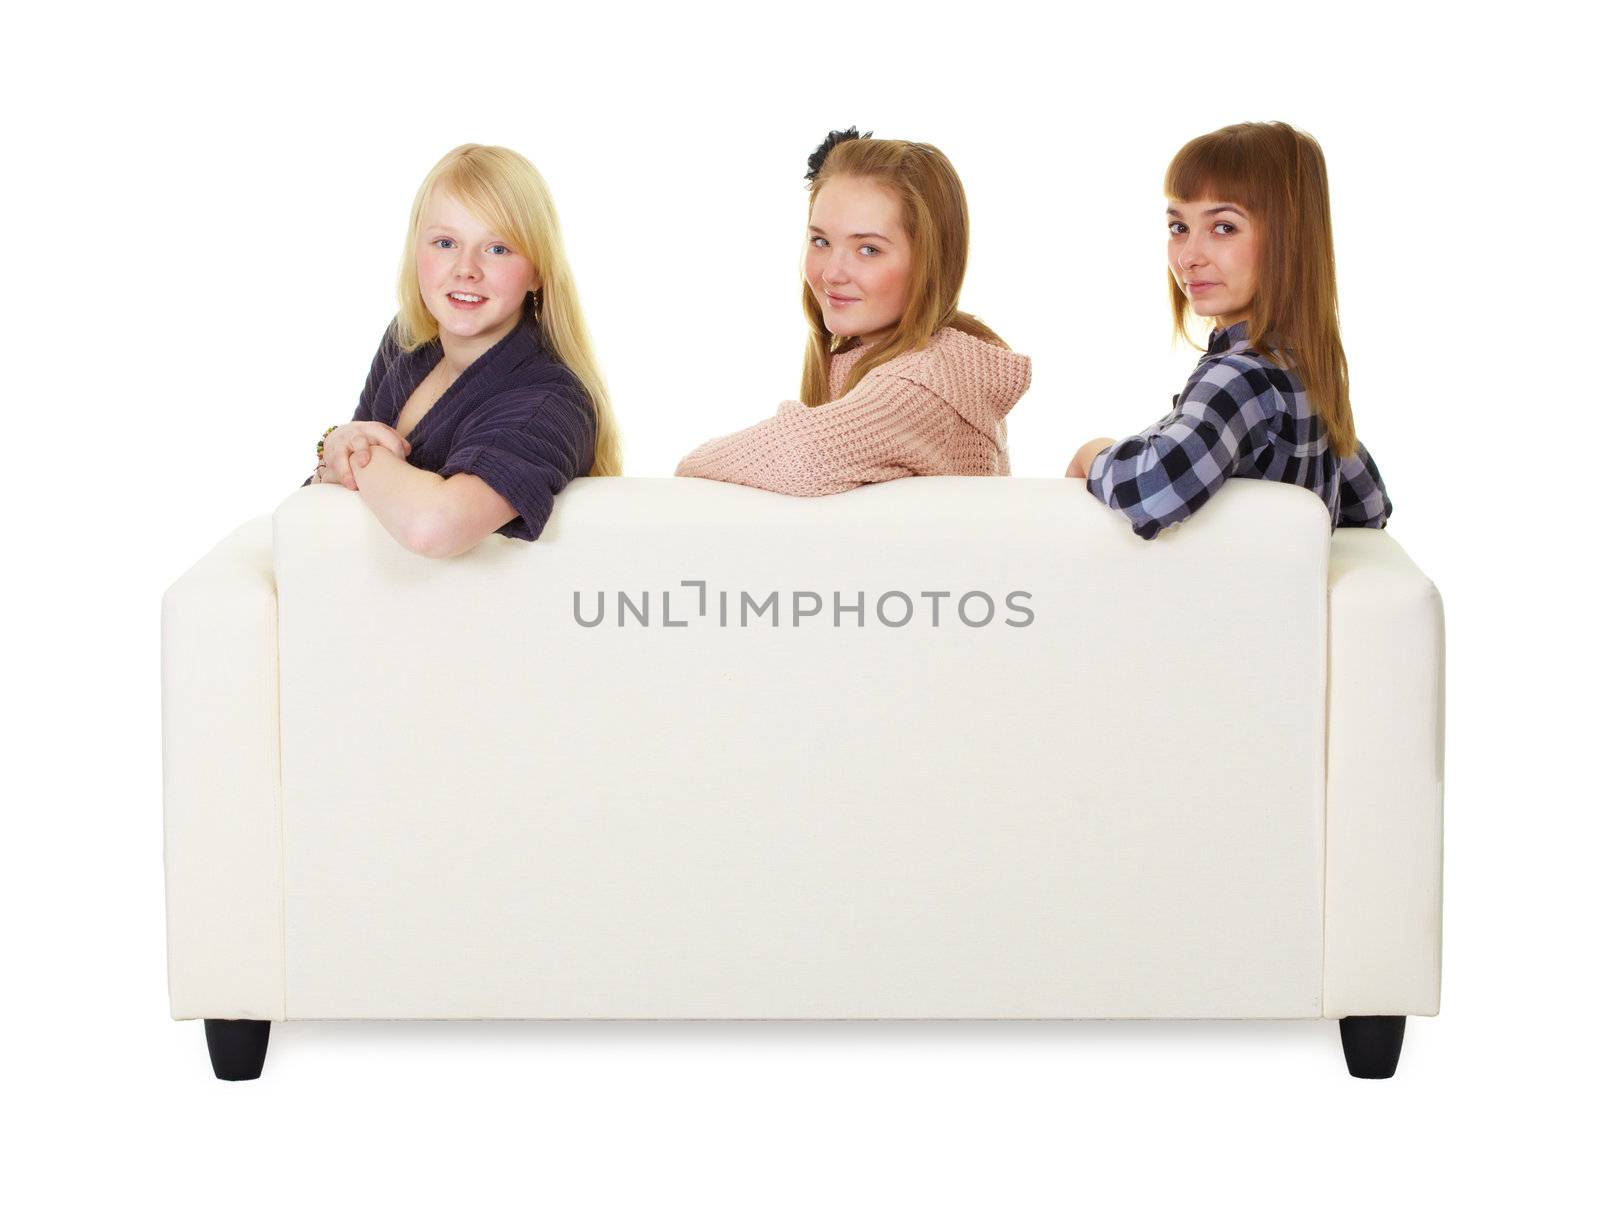 Three girls teens sitting on the couch on white background
